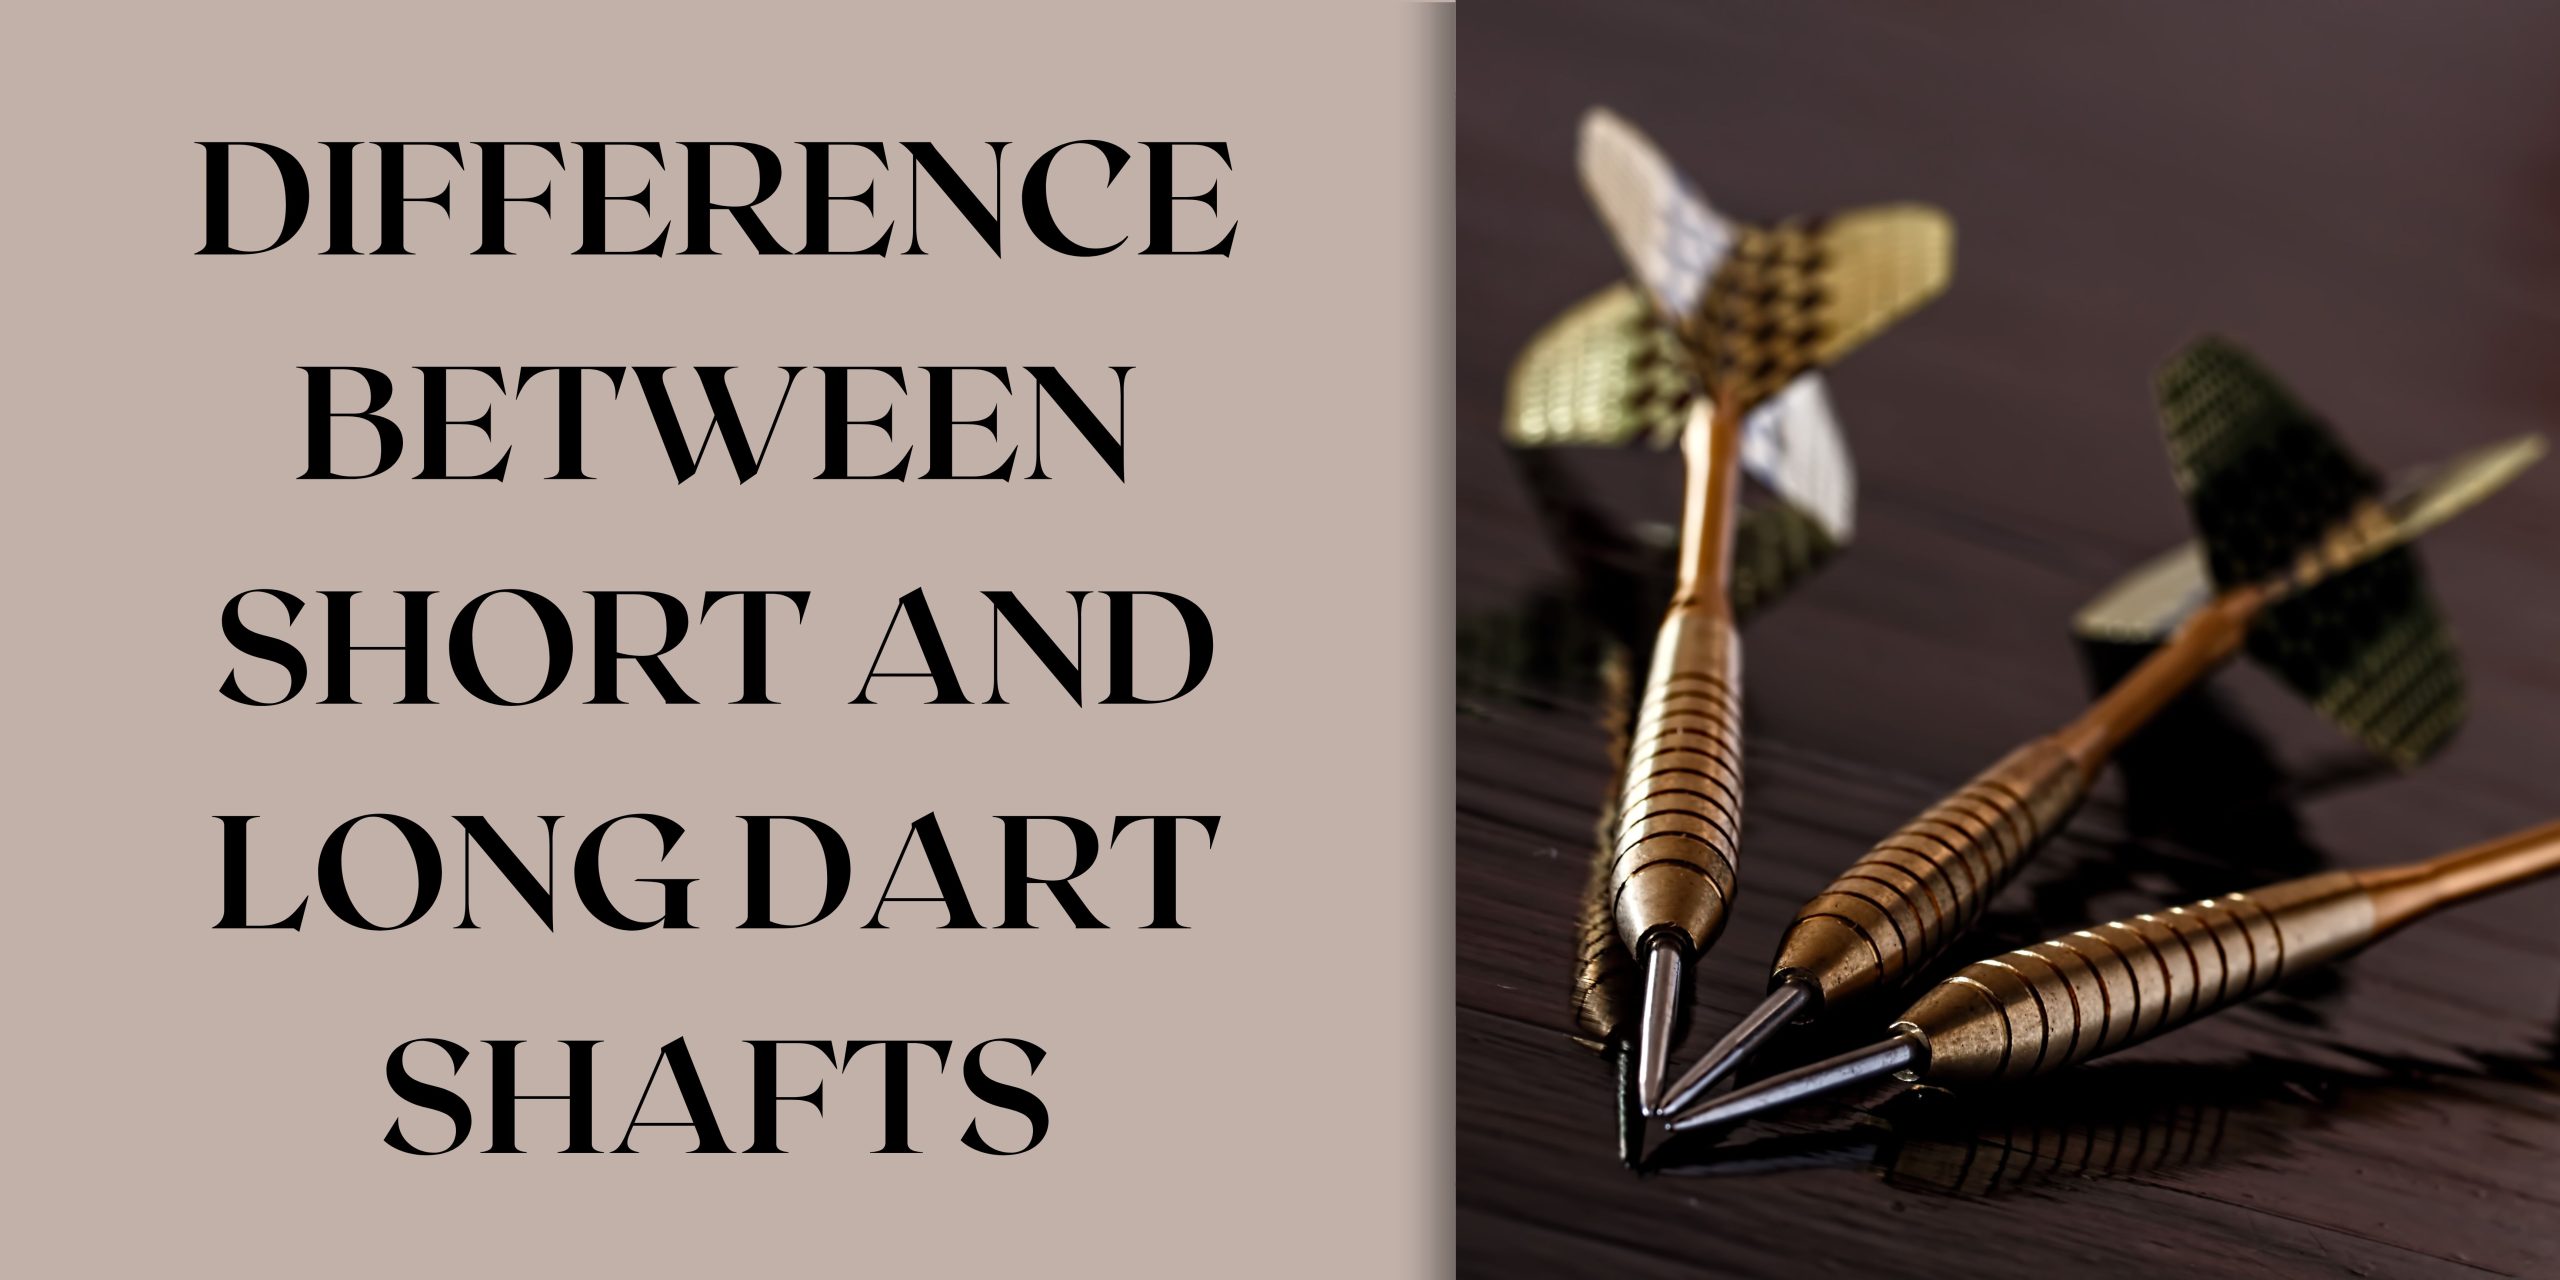 Difference between short and long dart shafts